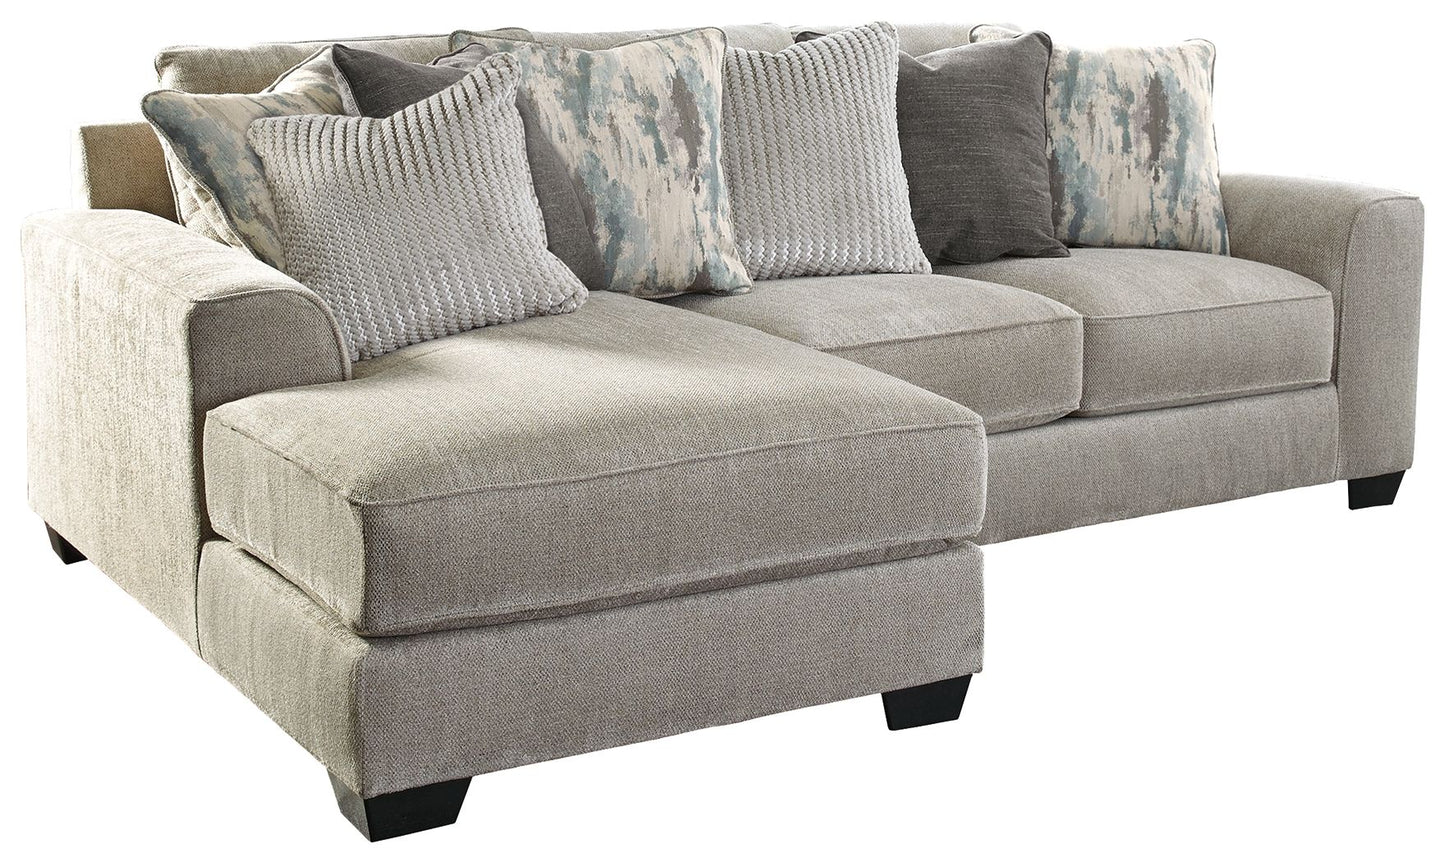 Ardsley - Pewter - 2-Piece Sectional With Laf Corner Chaise